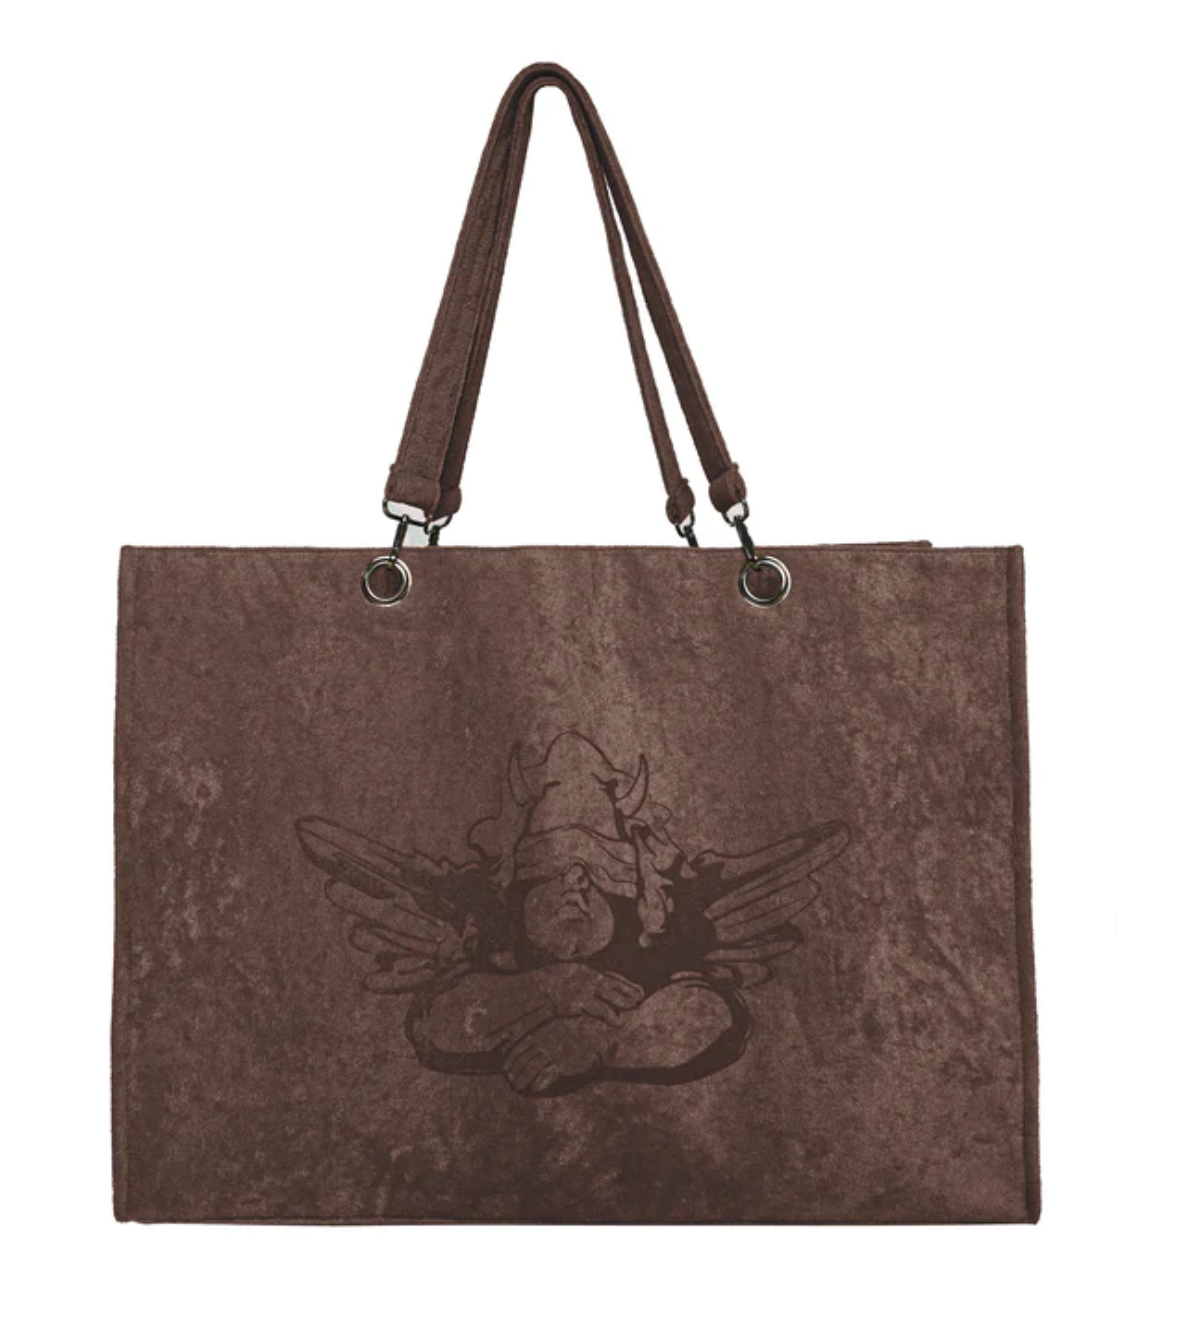 Chocolate Terry Cloth Tote